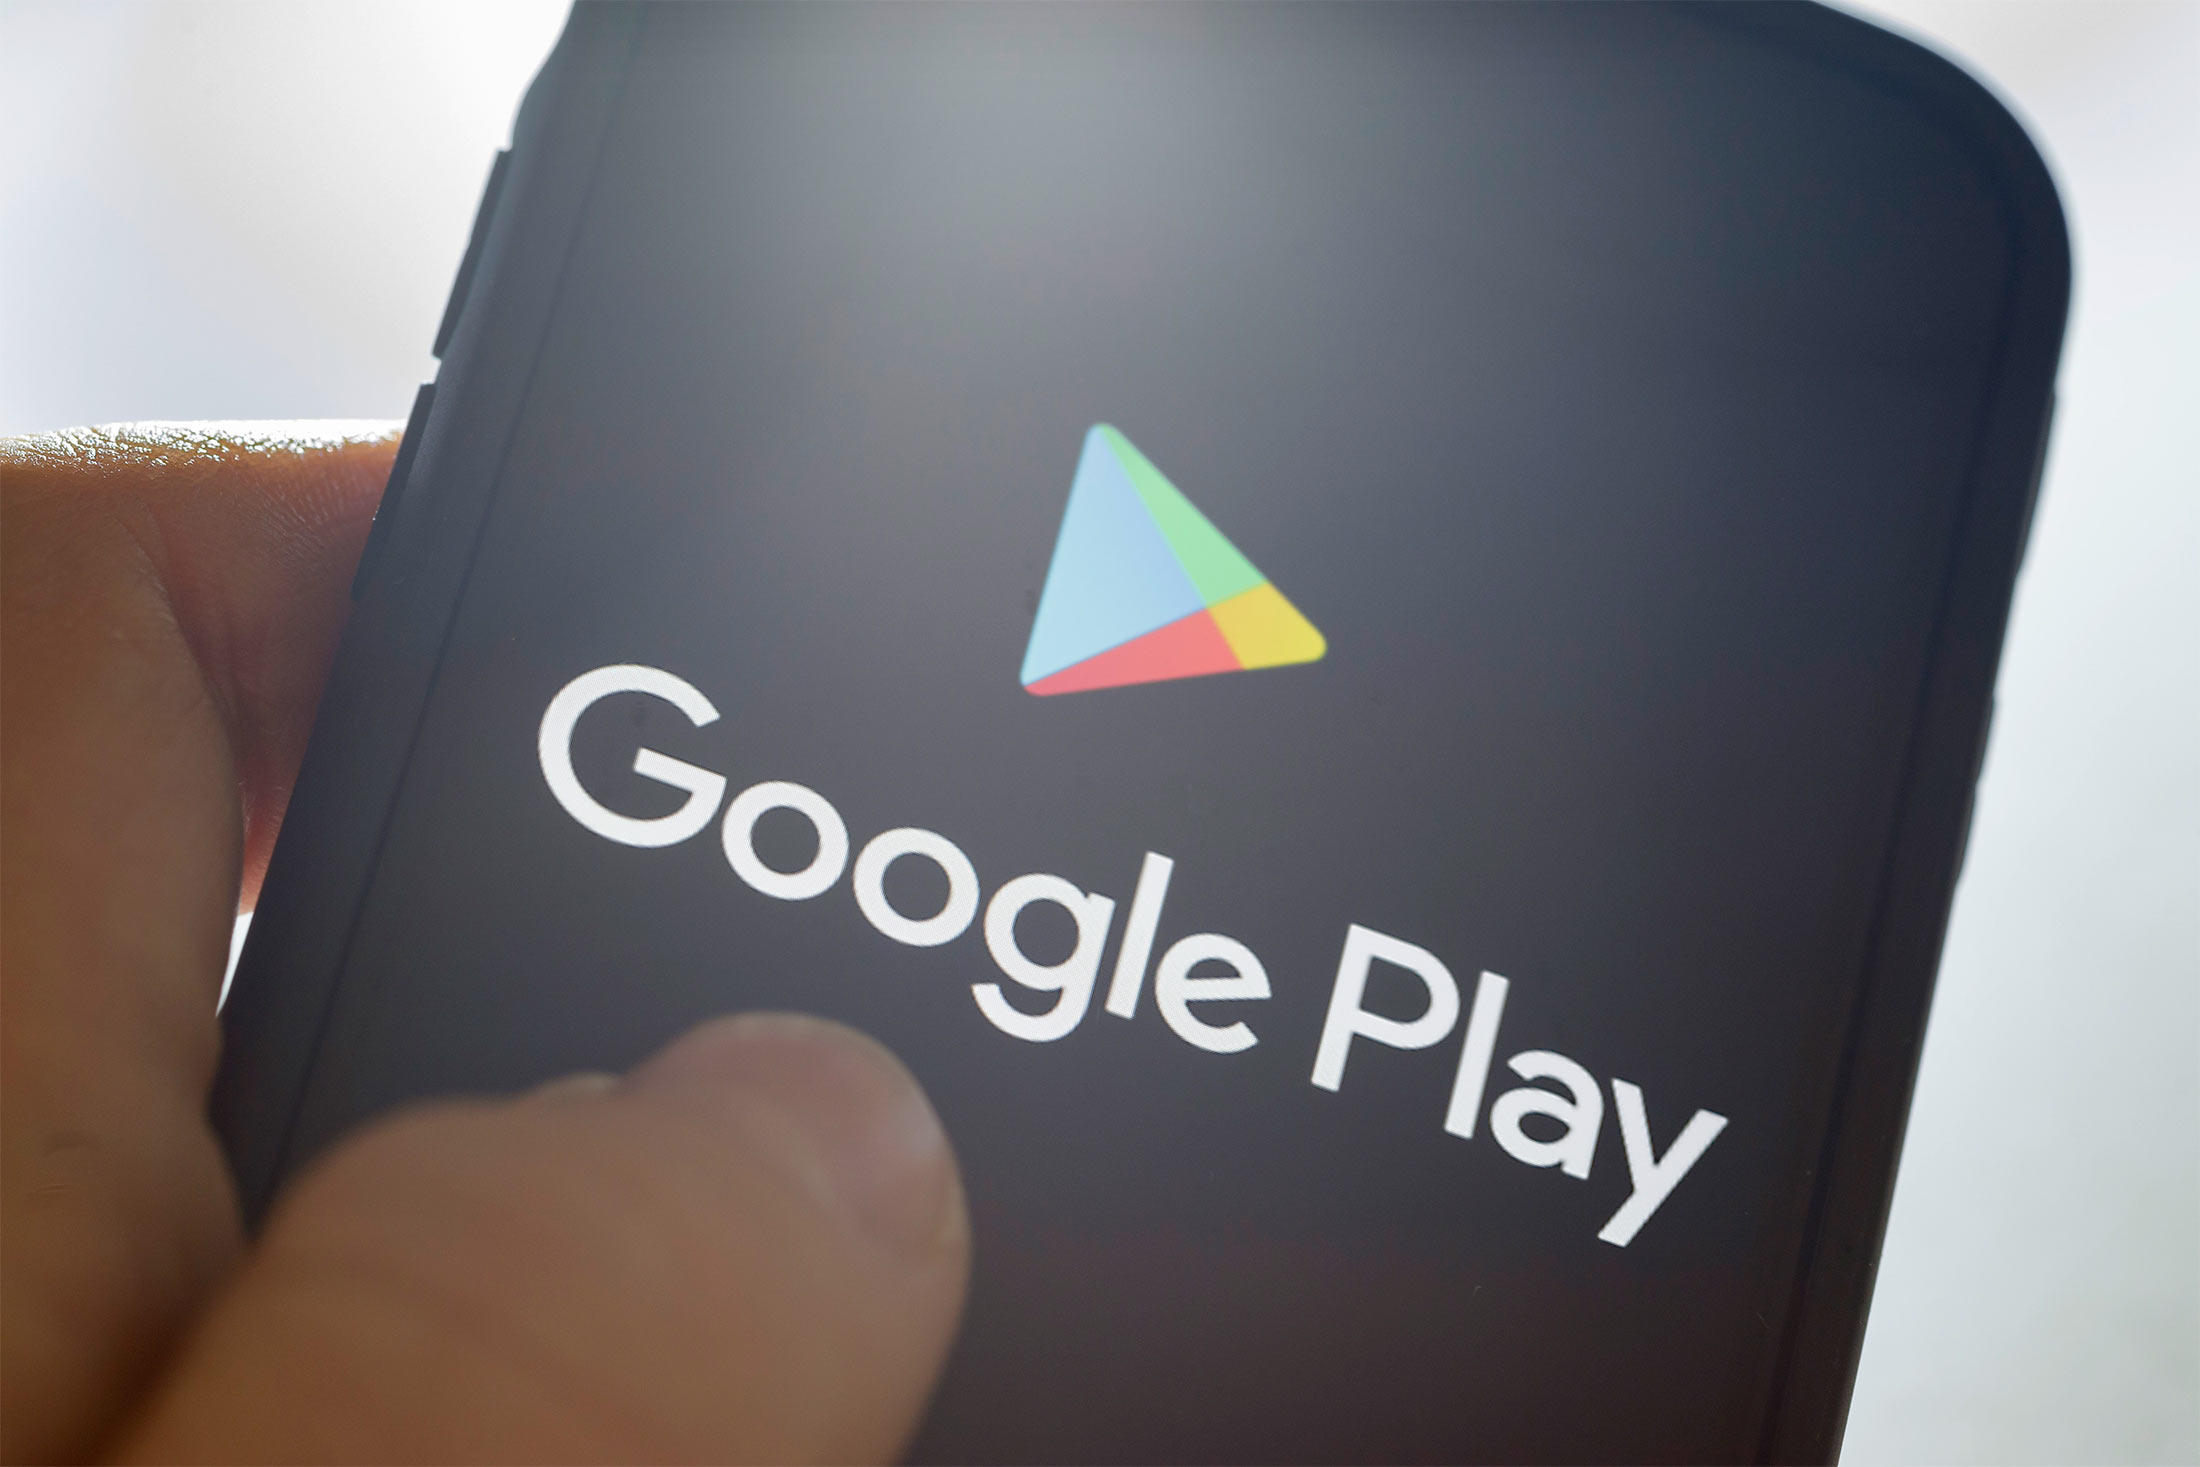 How to Install Google Play Store and Gapps (not pre installed), by JR  Android News, JR Android News